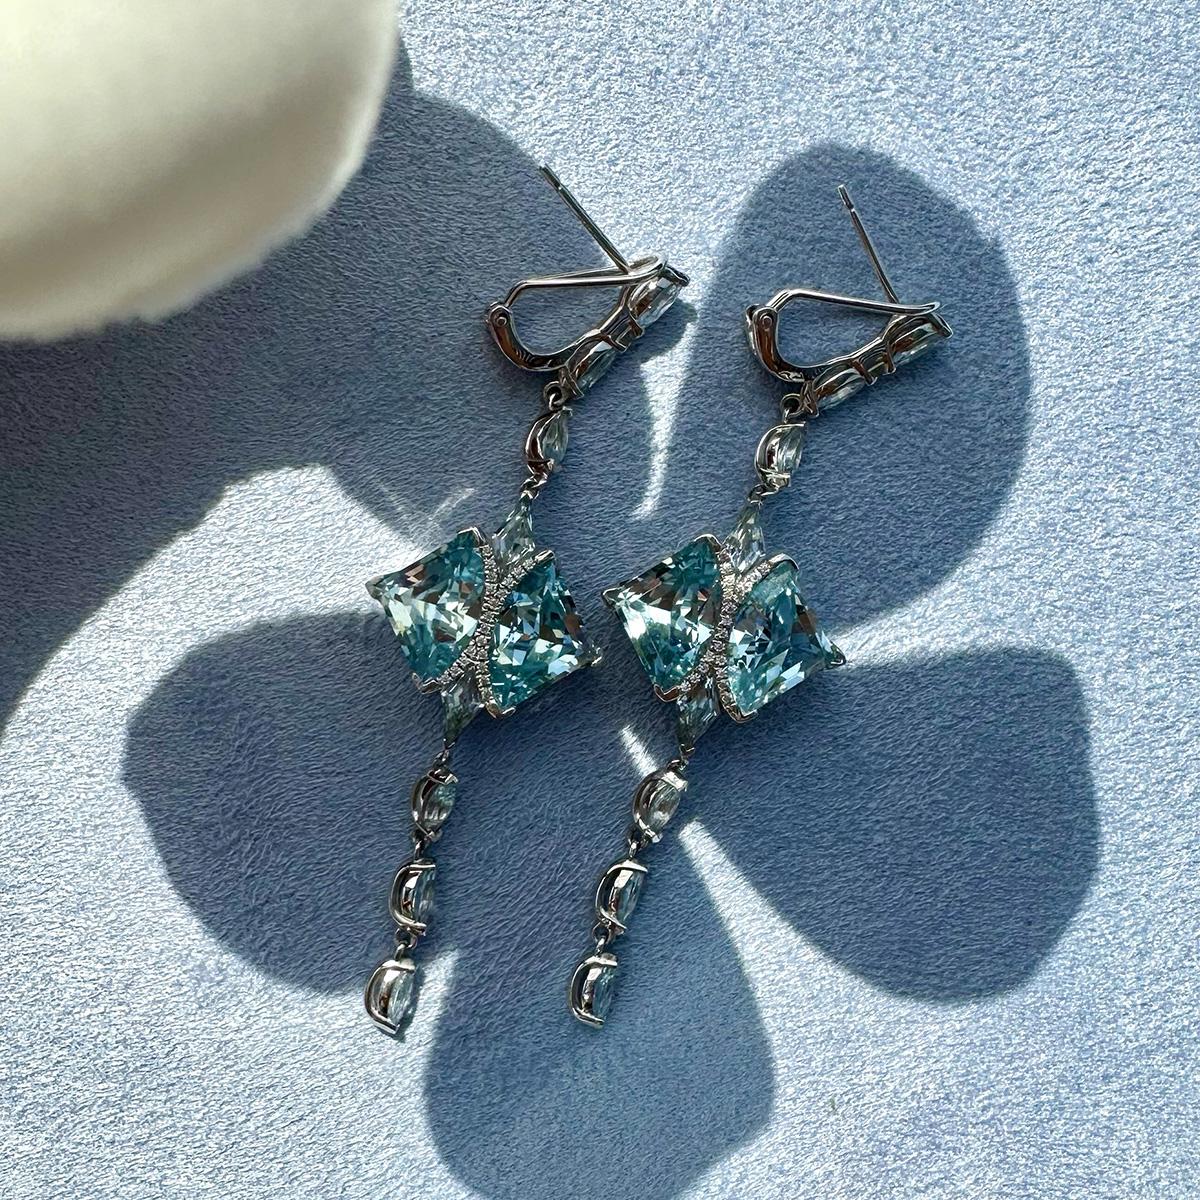 Mixed Cut The 20ct Aquamarine Eagle Ray Earrings, 18Kt White Gold For Sale